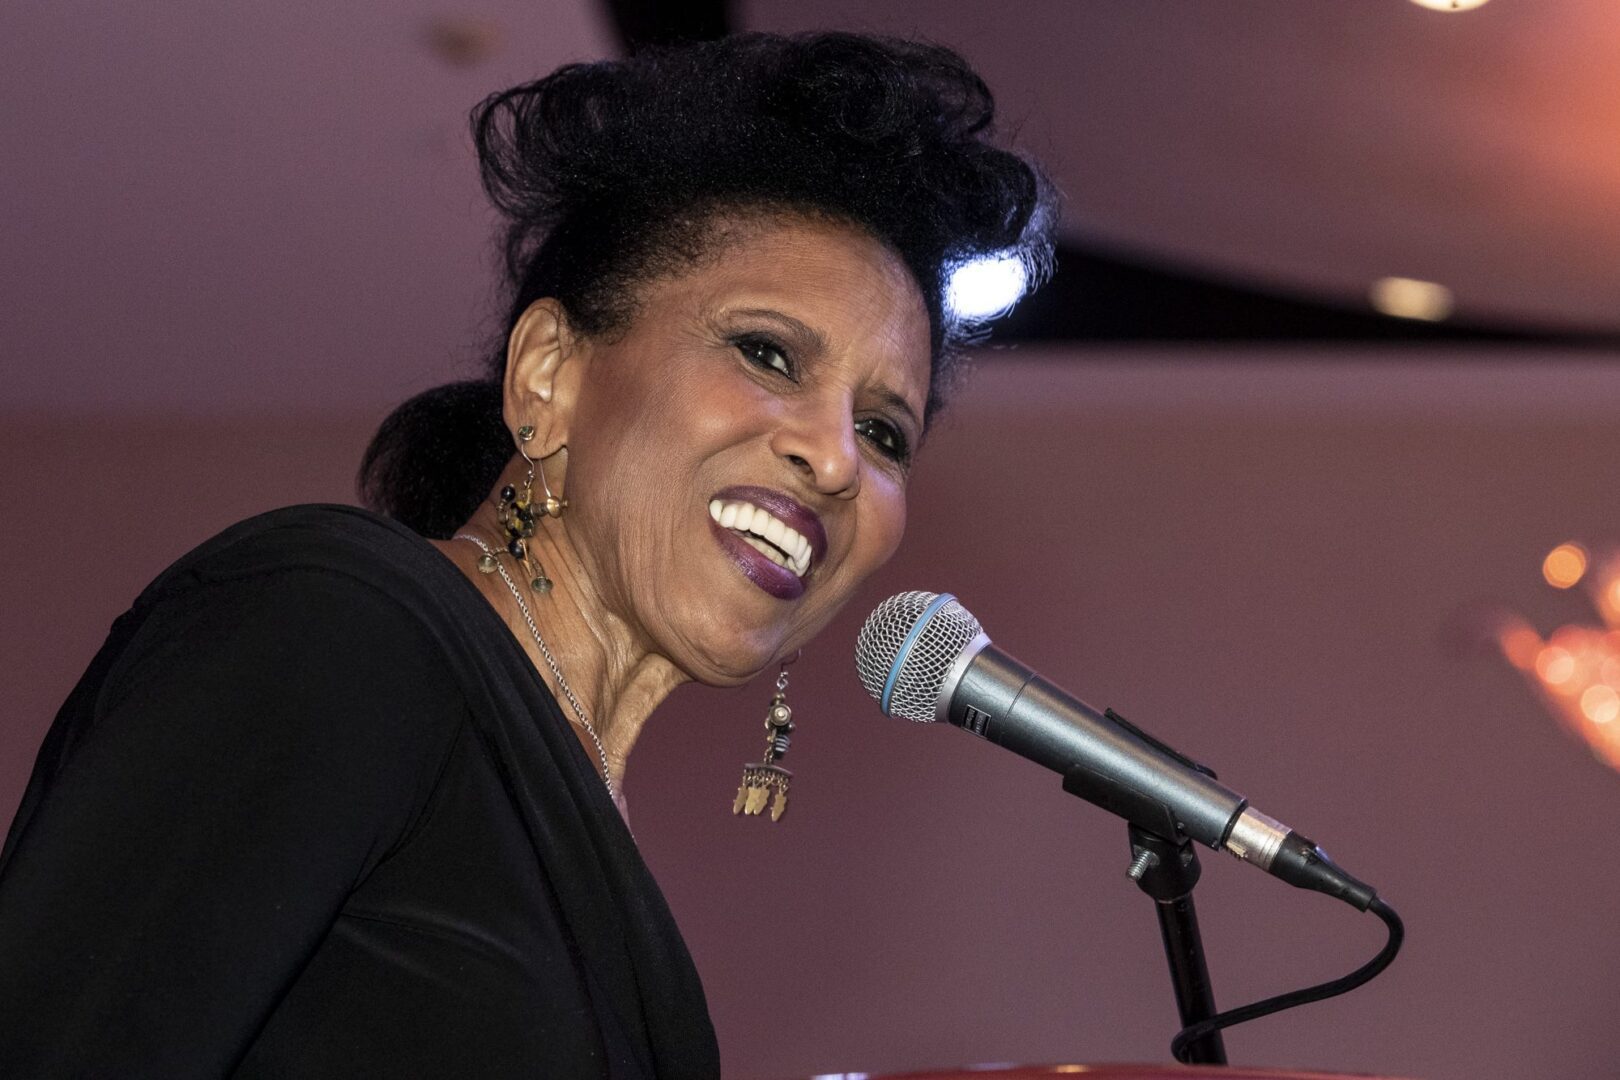 A black woman smiling into a microphone.